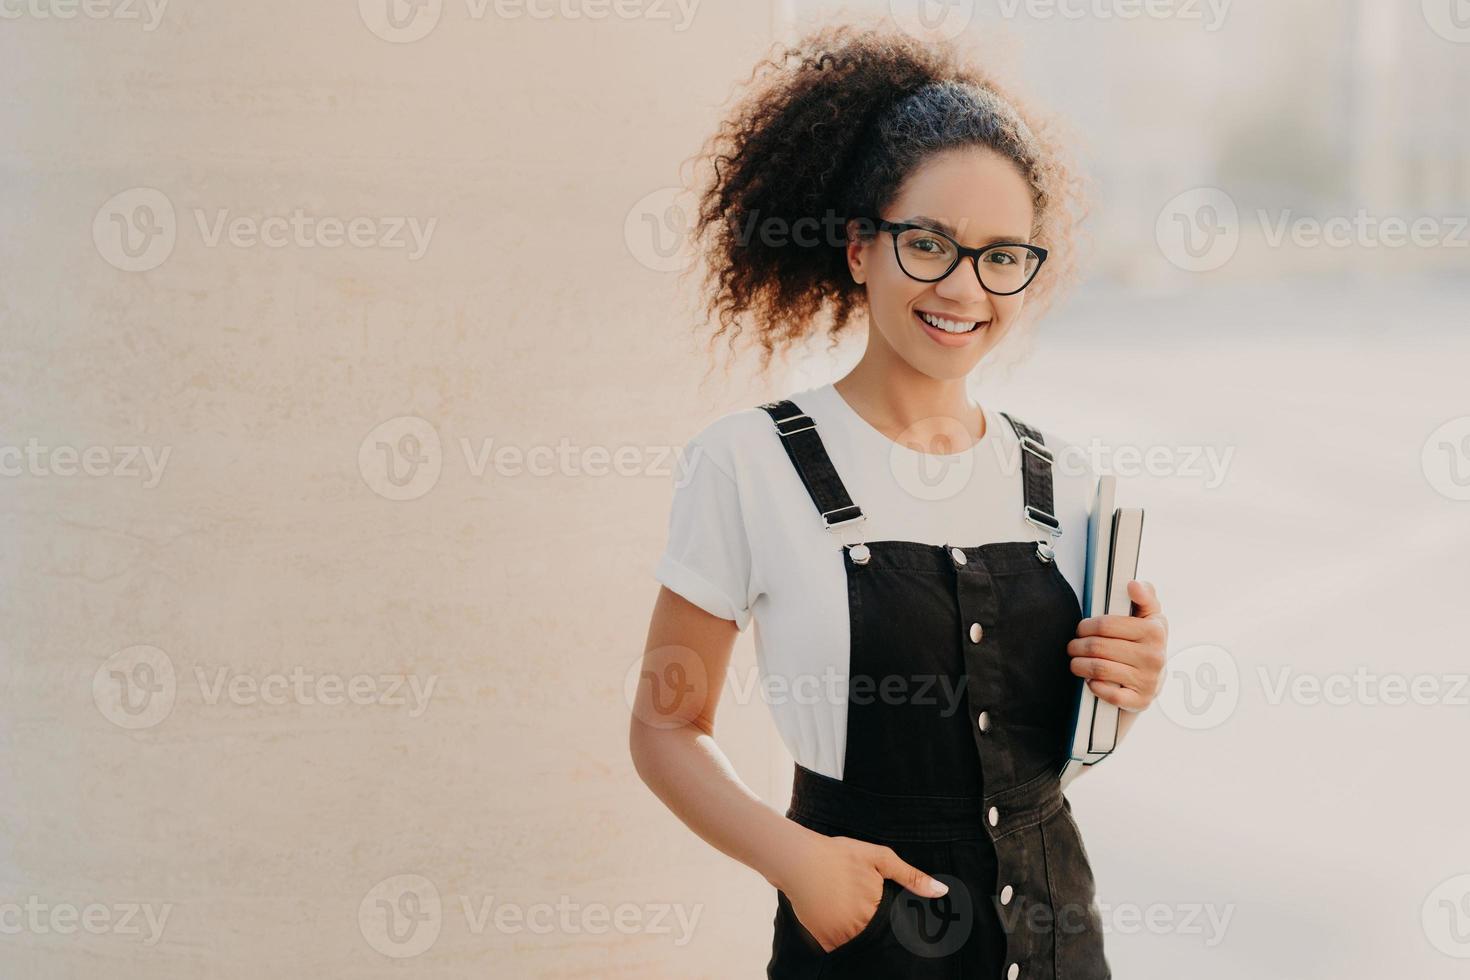 Lovely curly woman with combed hair, dressed in white t shirt, sarafan, keeps hand in pocket, holds book and textbook, wears optical glasses, poses at unversity campus, smiles happily at camera photo